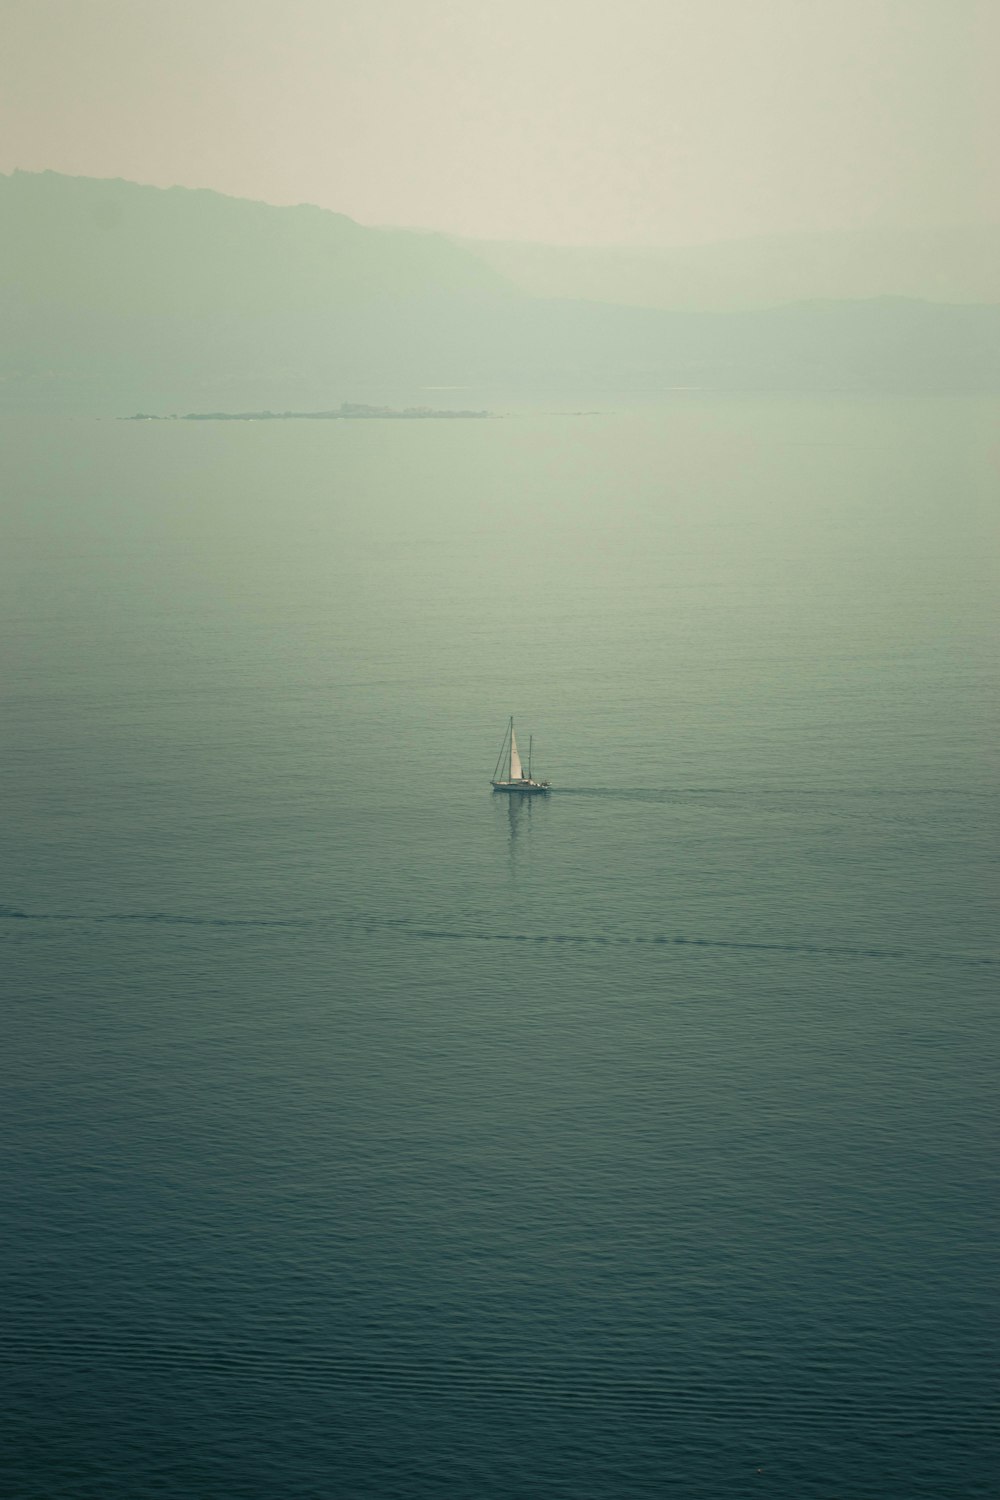 a boat is out in the middle of the ocean